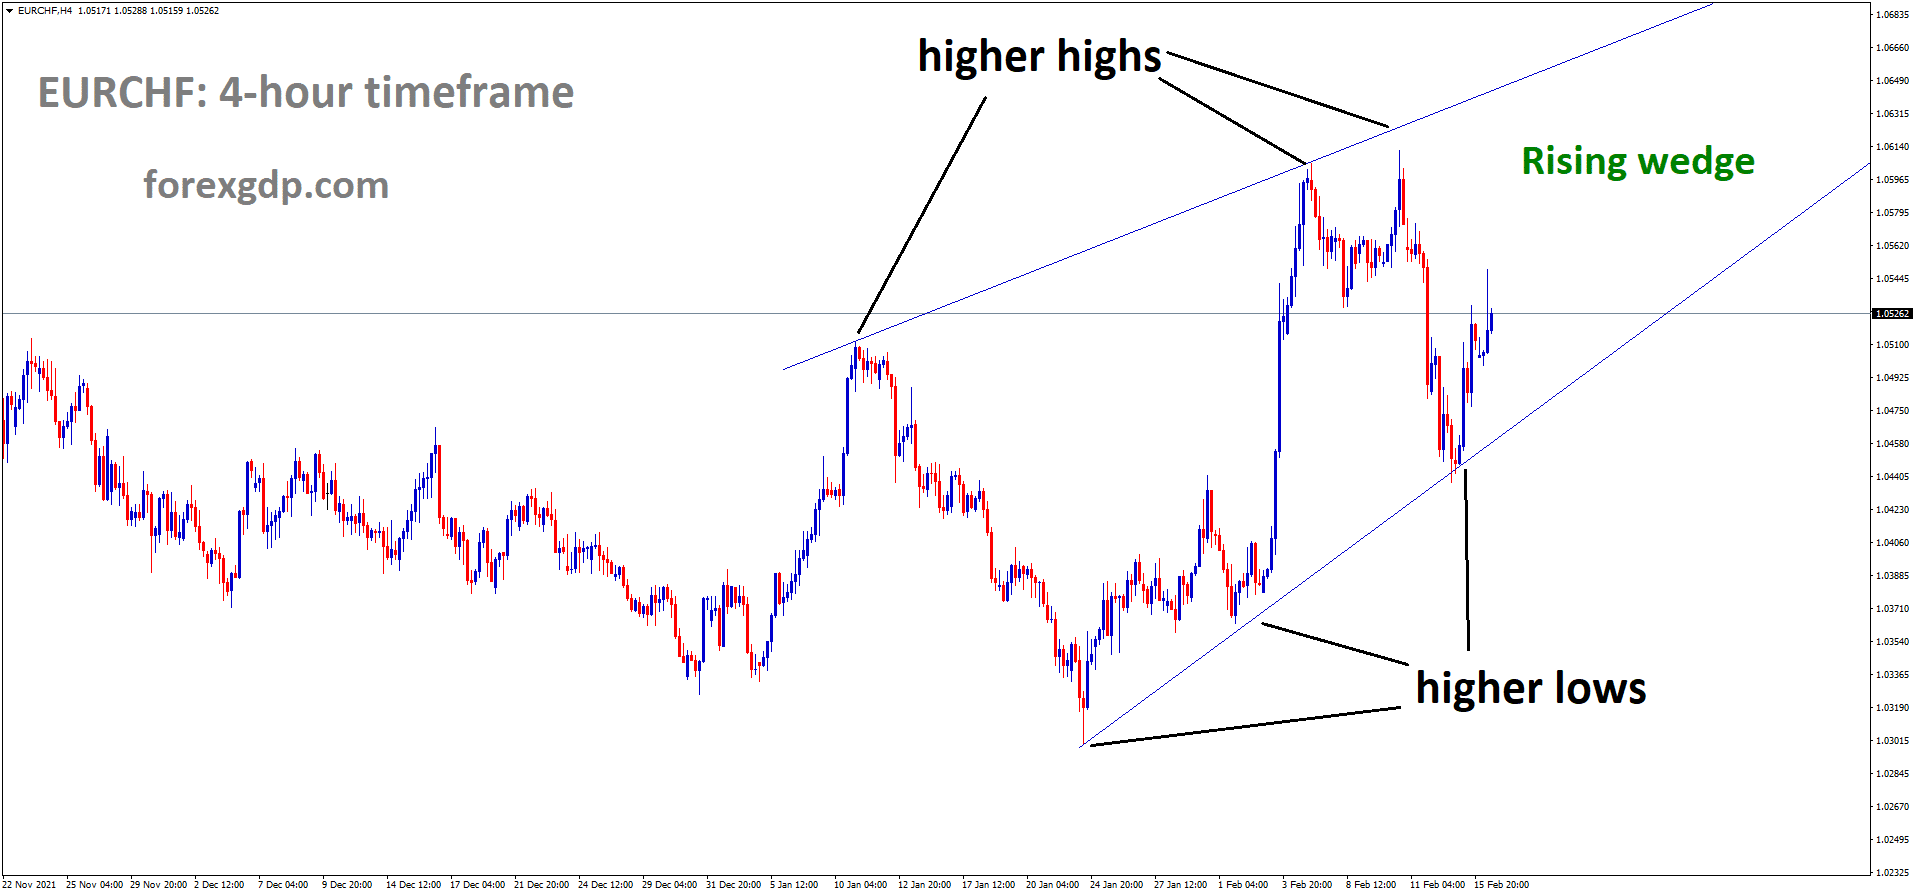 EURCHF is moving in a rising wedge pattern and the market has rebounded from the higher low area of the pattern